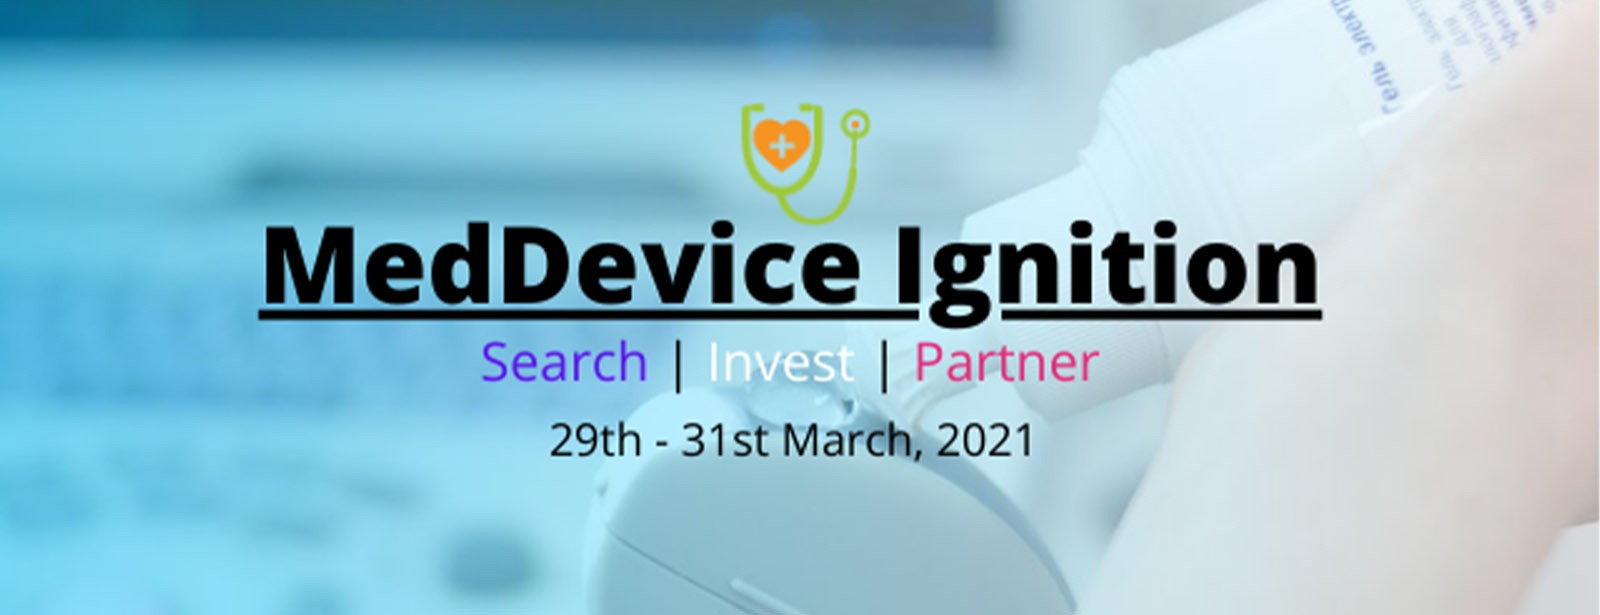 MedDevice Ignition 2021 - Coming Soon in UAE